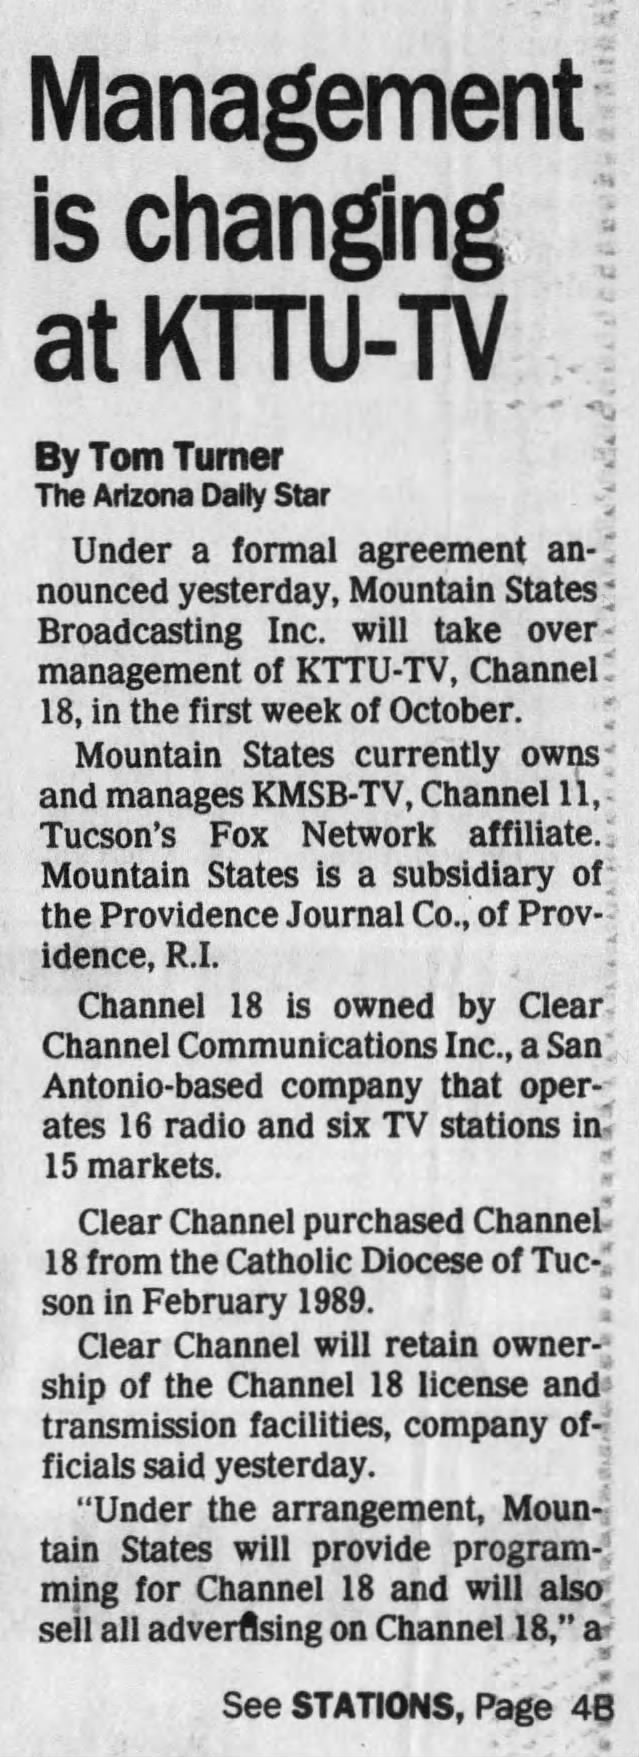 Management is changing at KTTU-TV